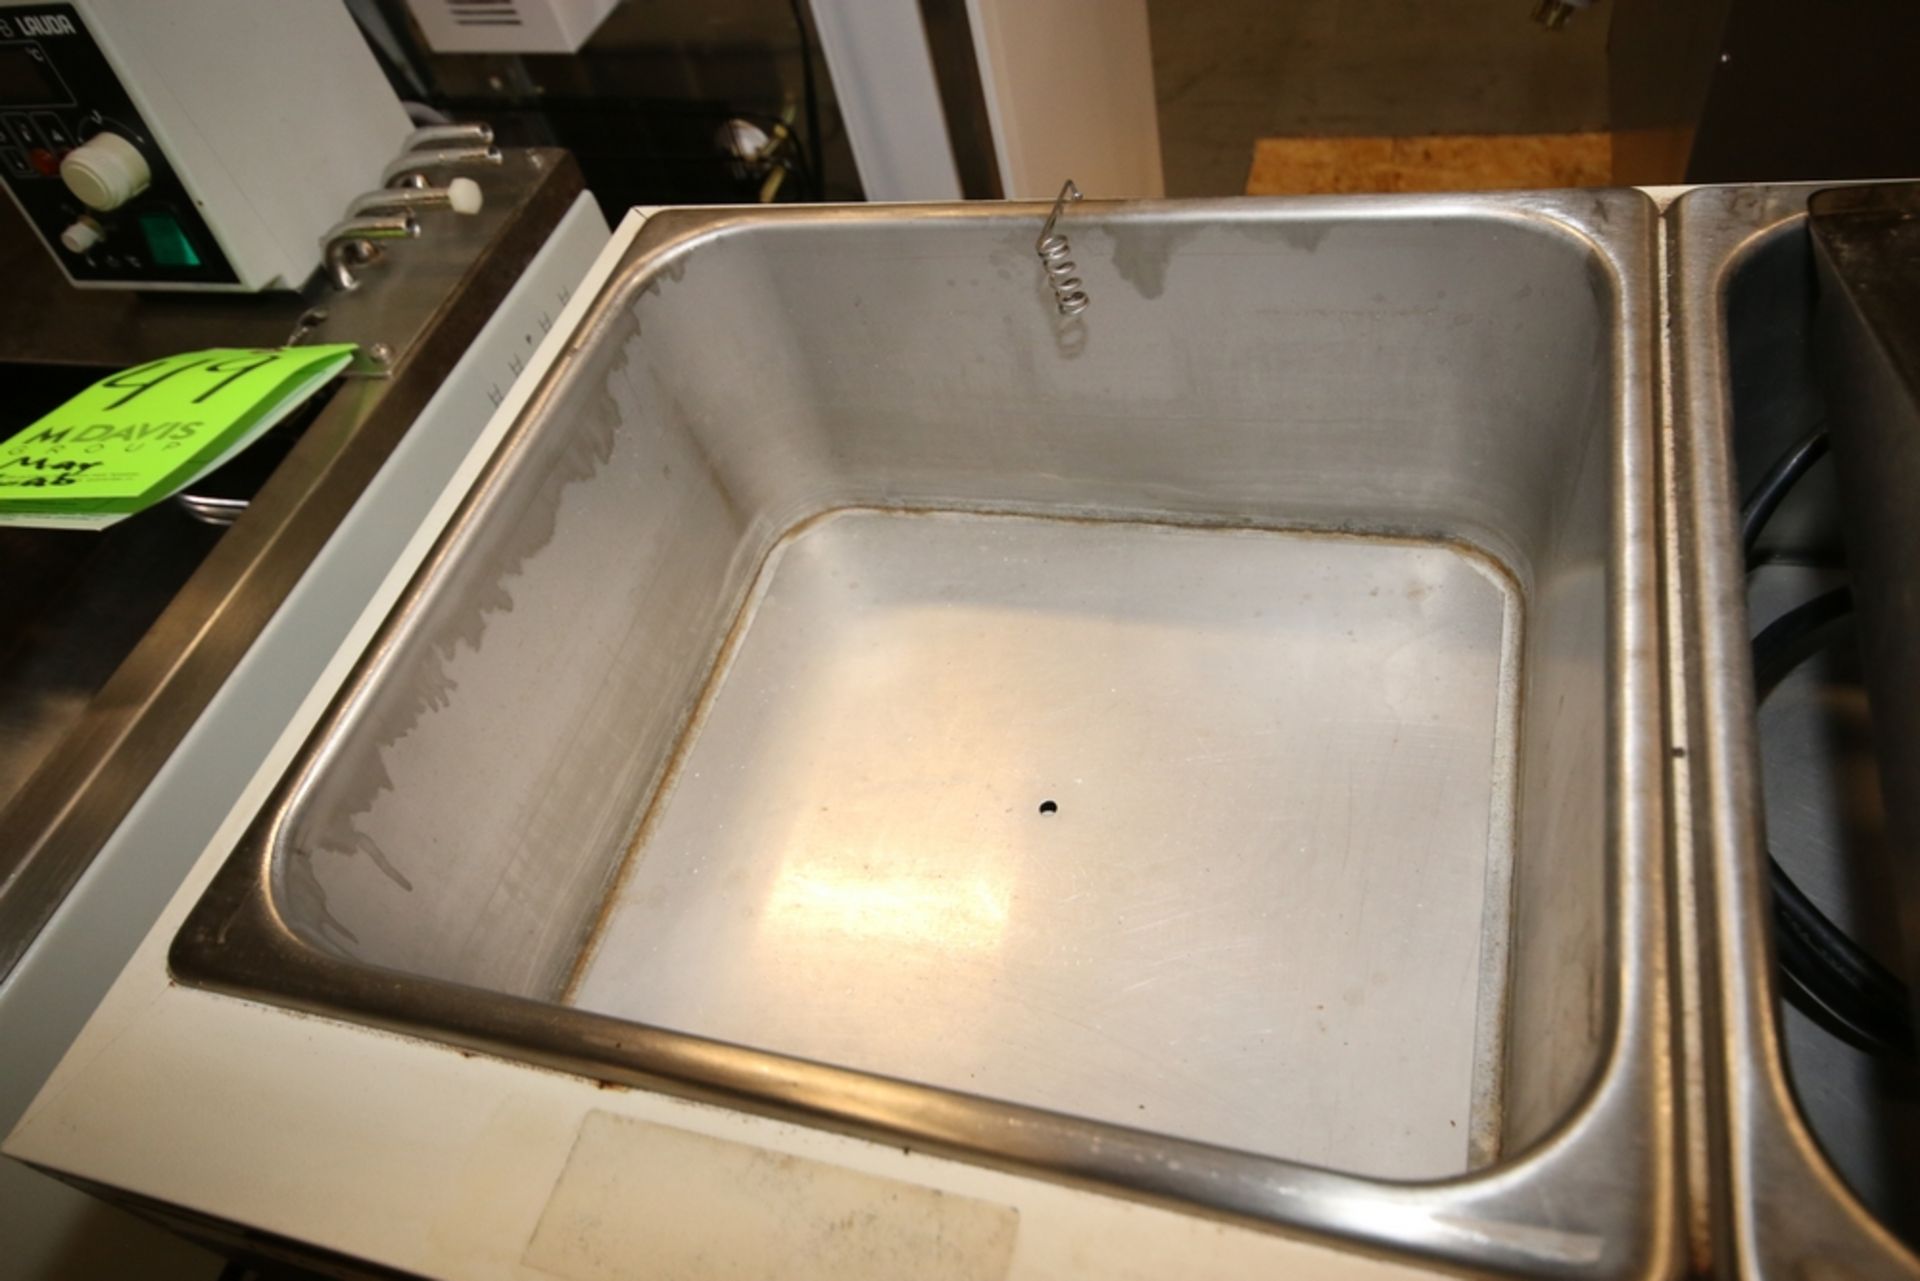 Precision S/S Dual Compartment Water Bath, Cat. No.: 5122105B, S/N 601061704 ***Located in MDG - Image 2 of 4